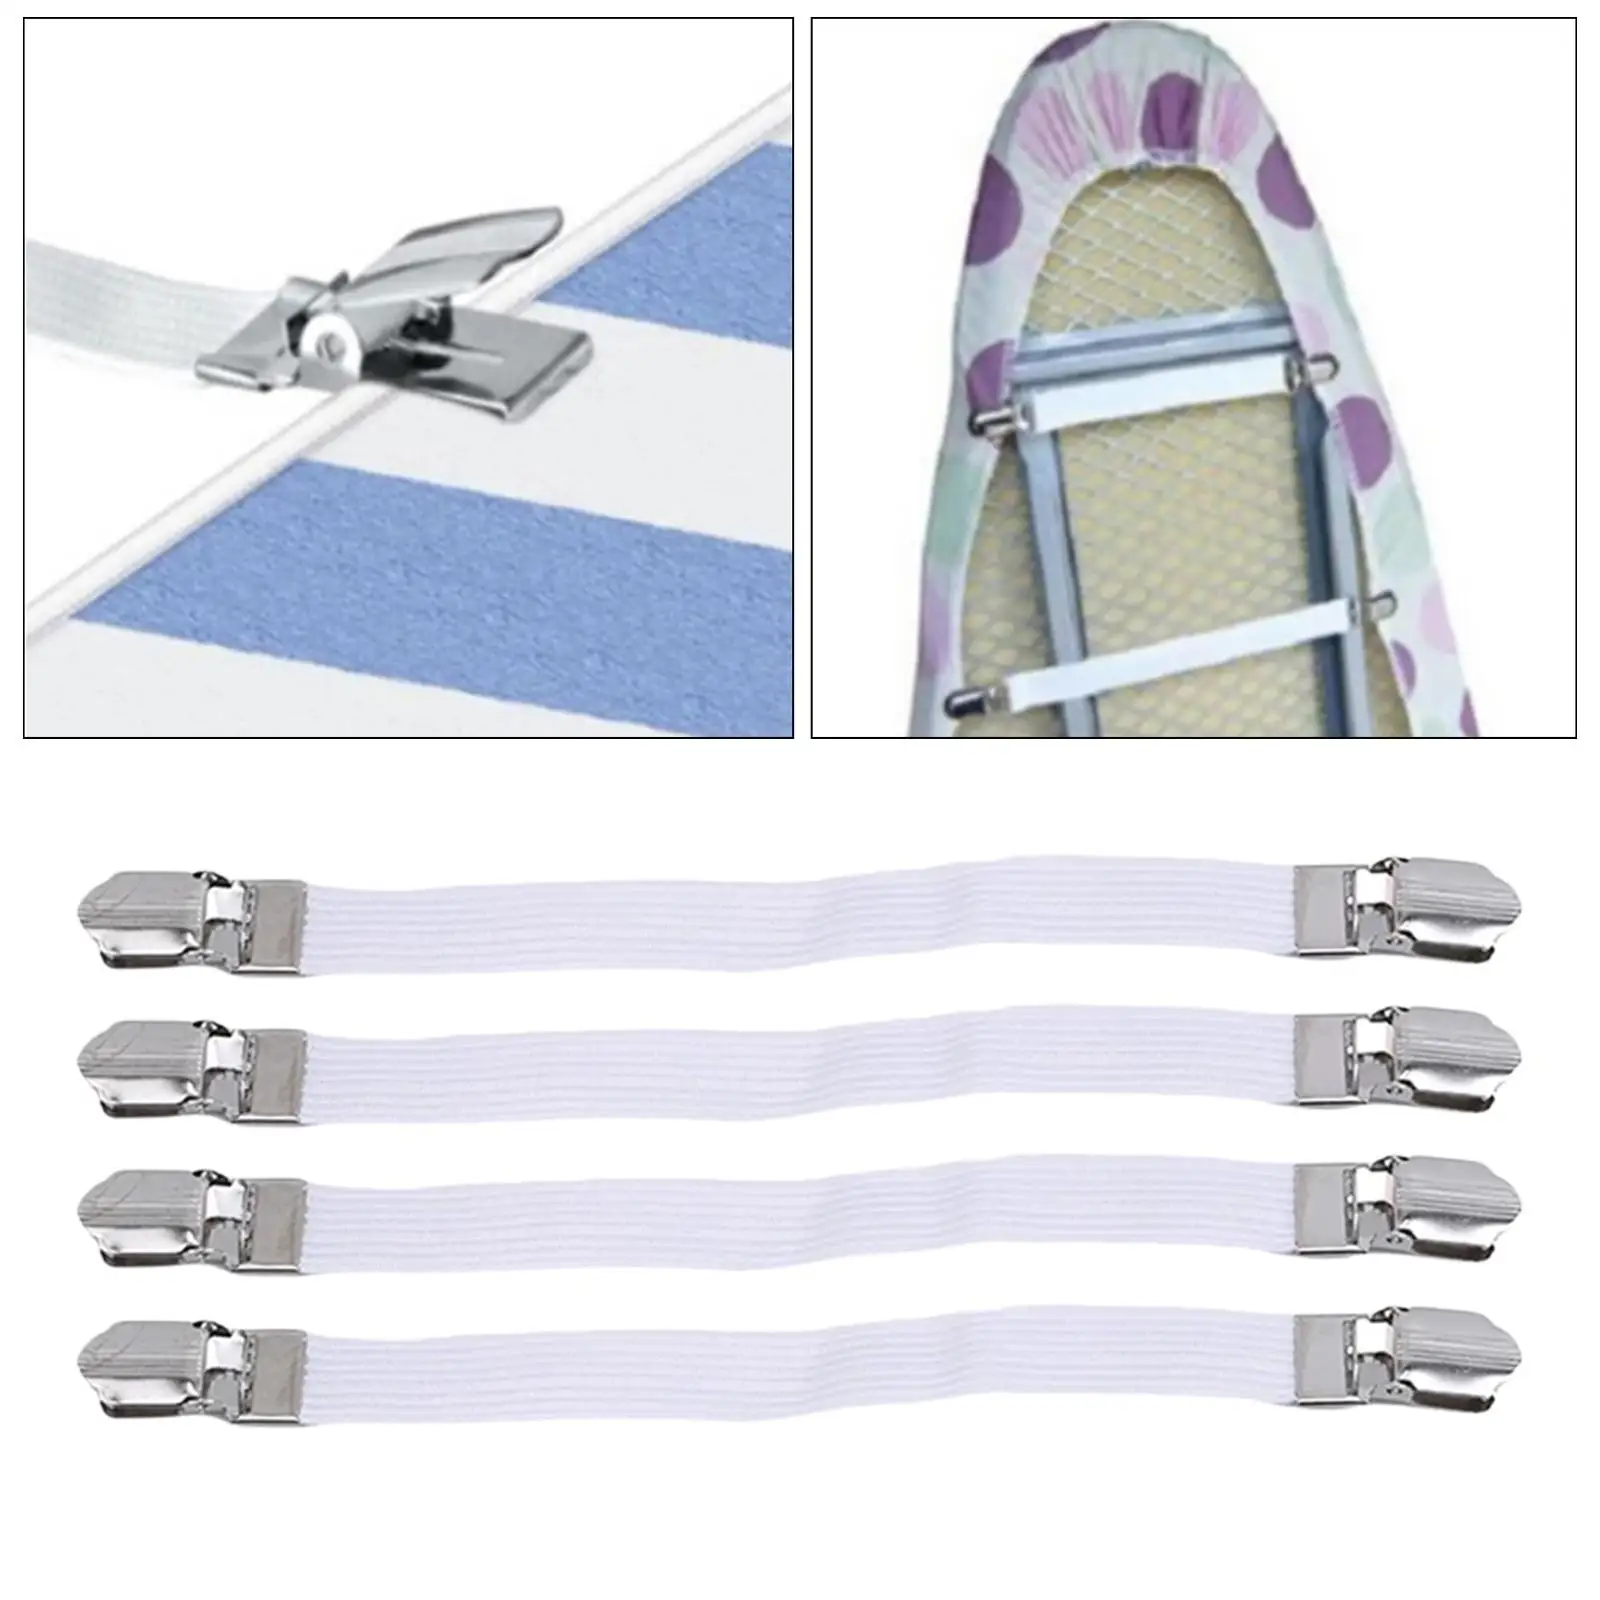 4x Elastic Ironing Board Cover Fasteners Bed Sheet Fasteners Suspenders Non Slip